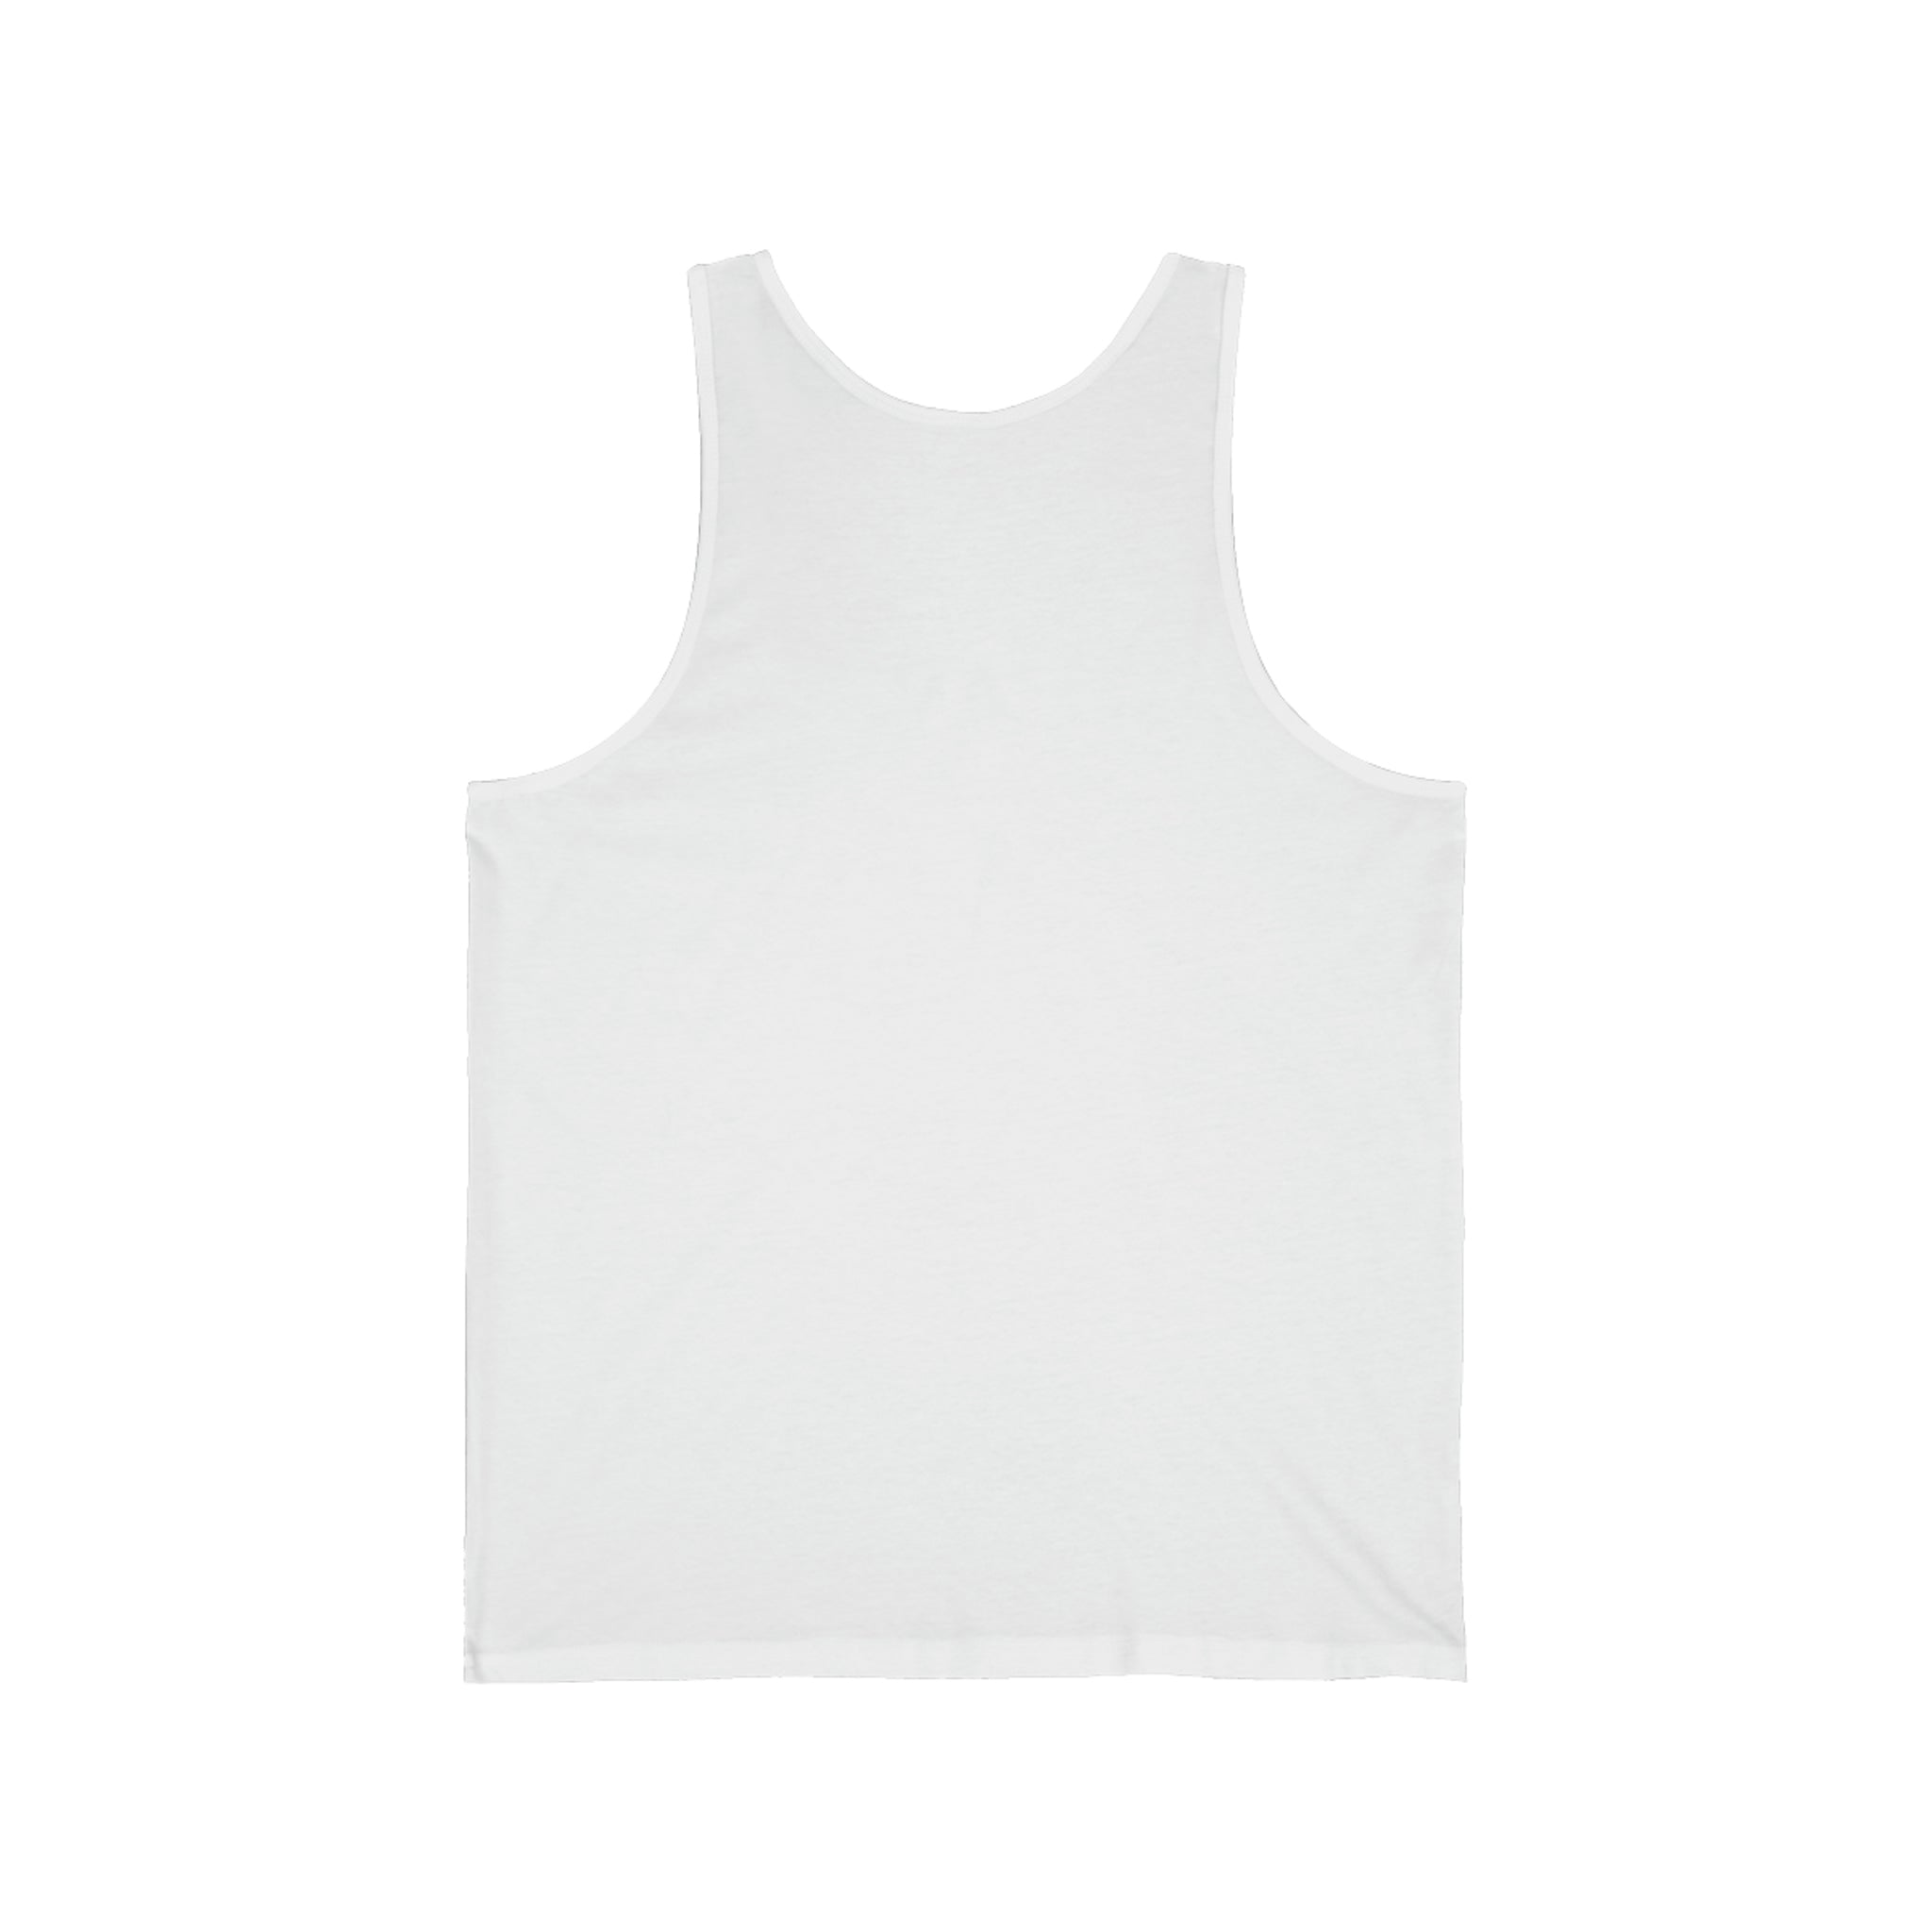 "Summertime Bliss: Embracing the Sunshine and Smiles!"- Tank Top